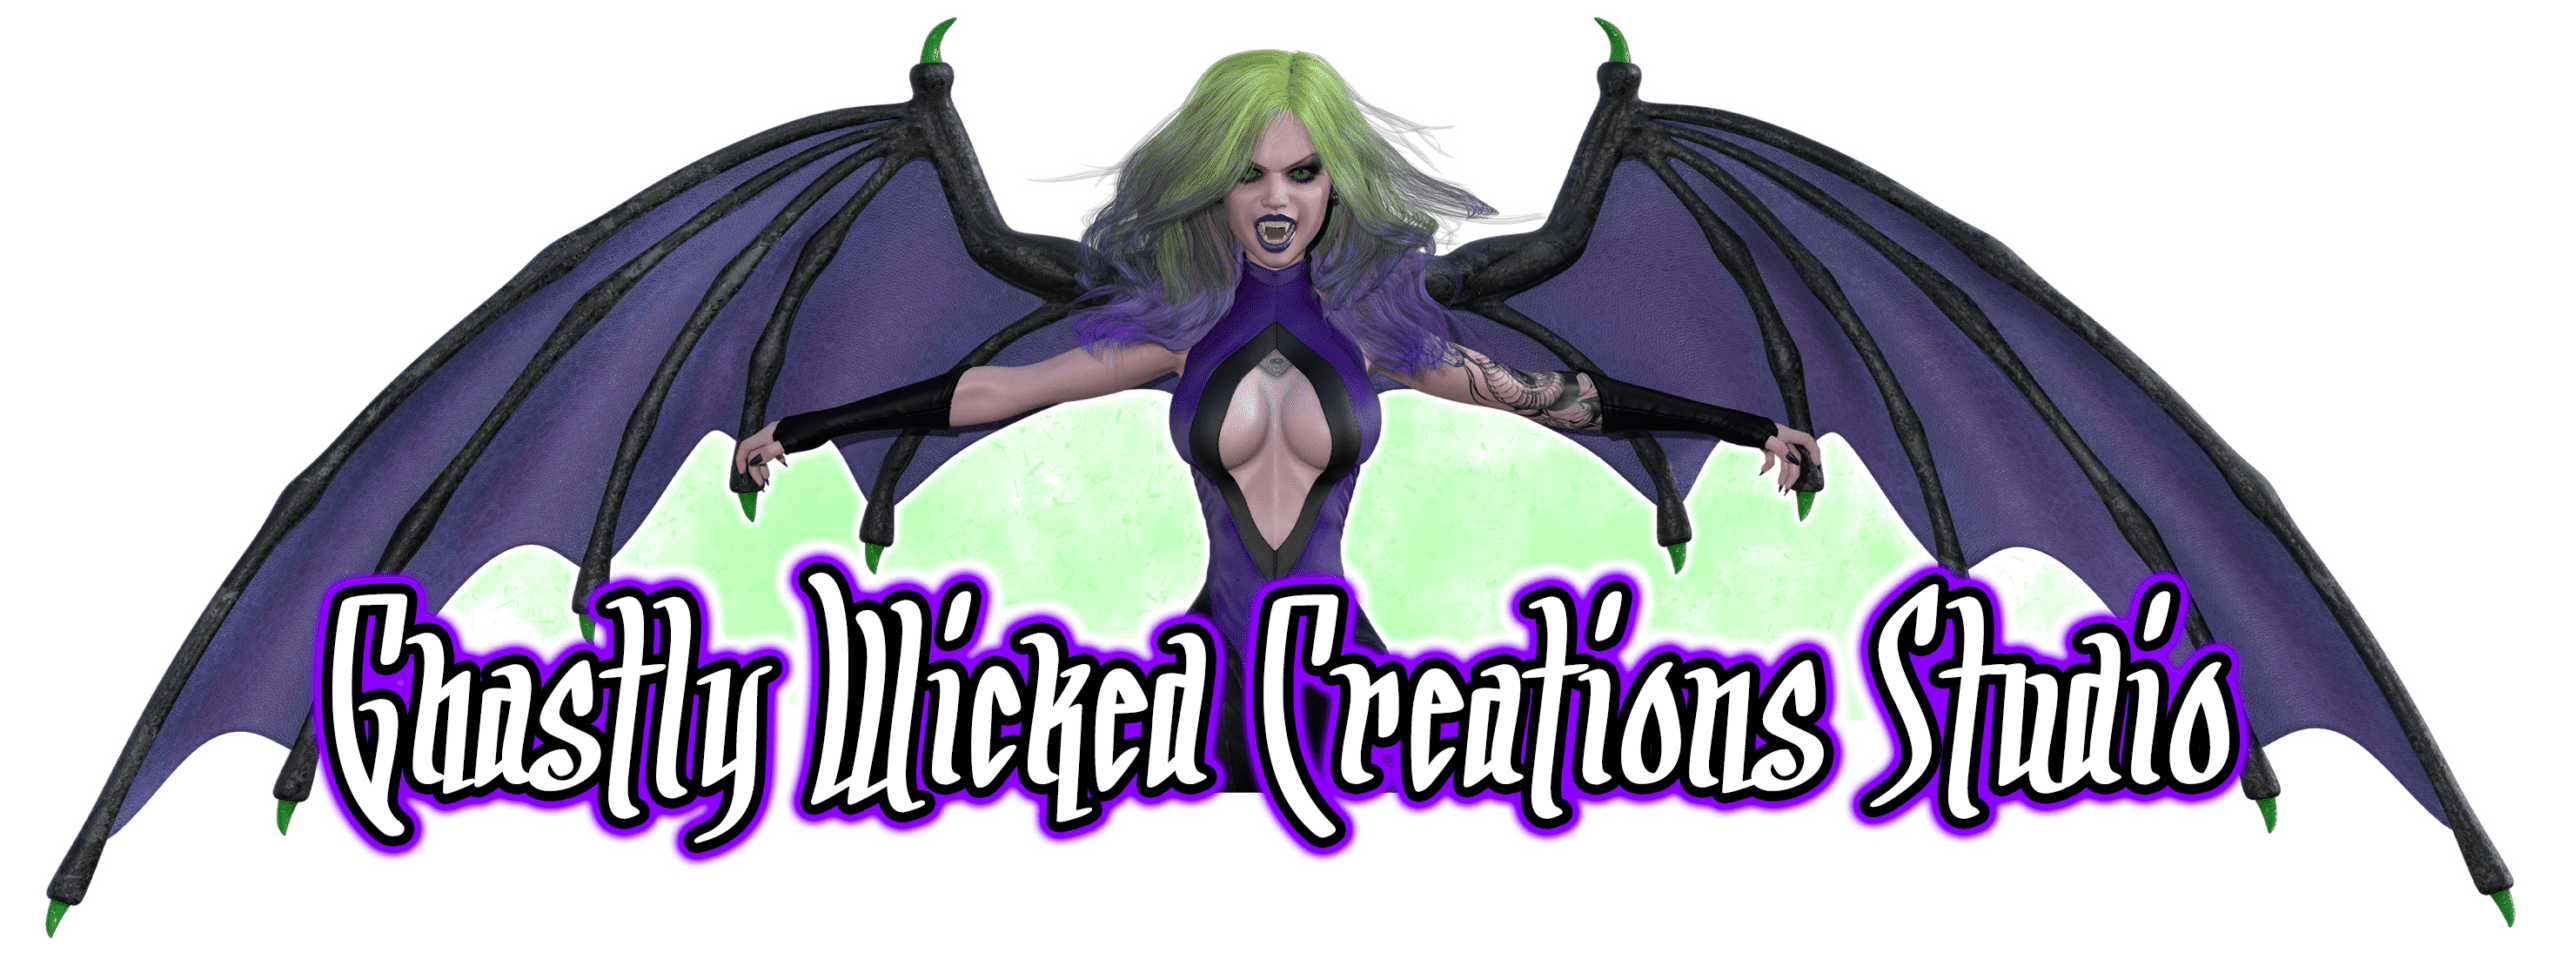 Ghastly Wicked Creations Studio Banner